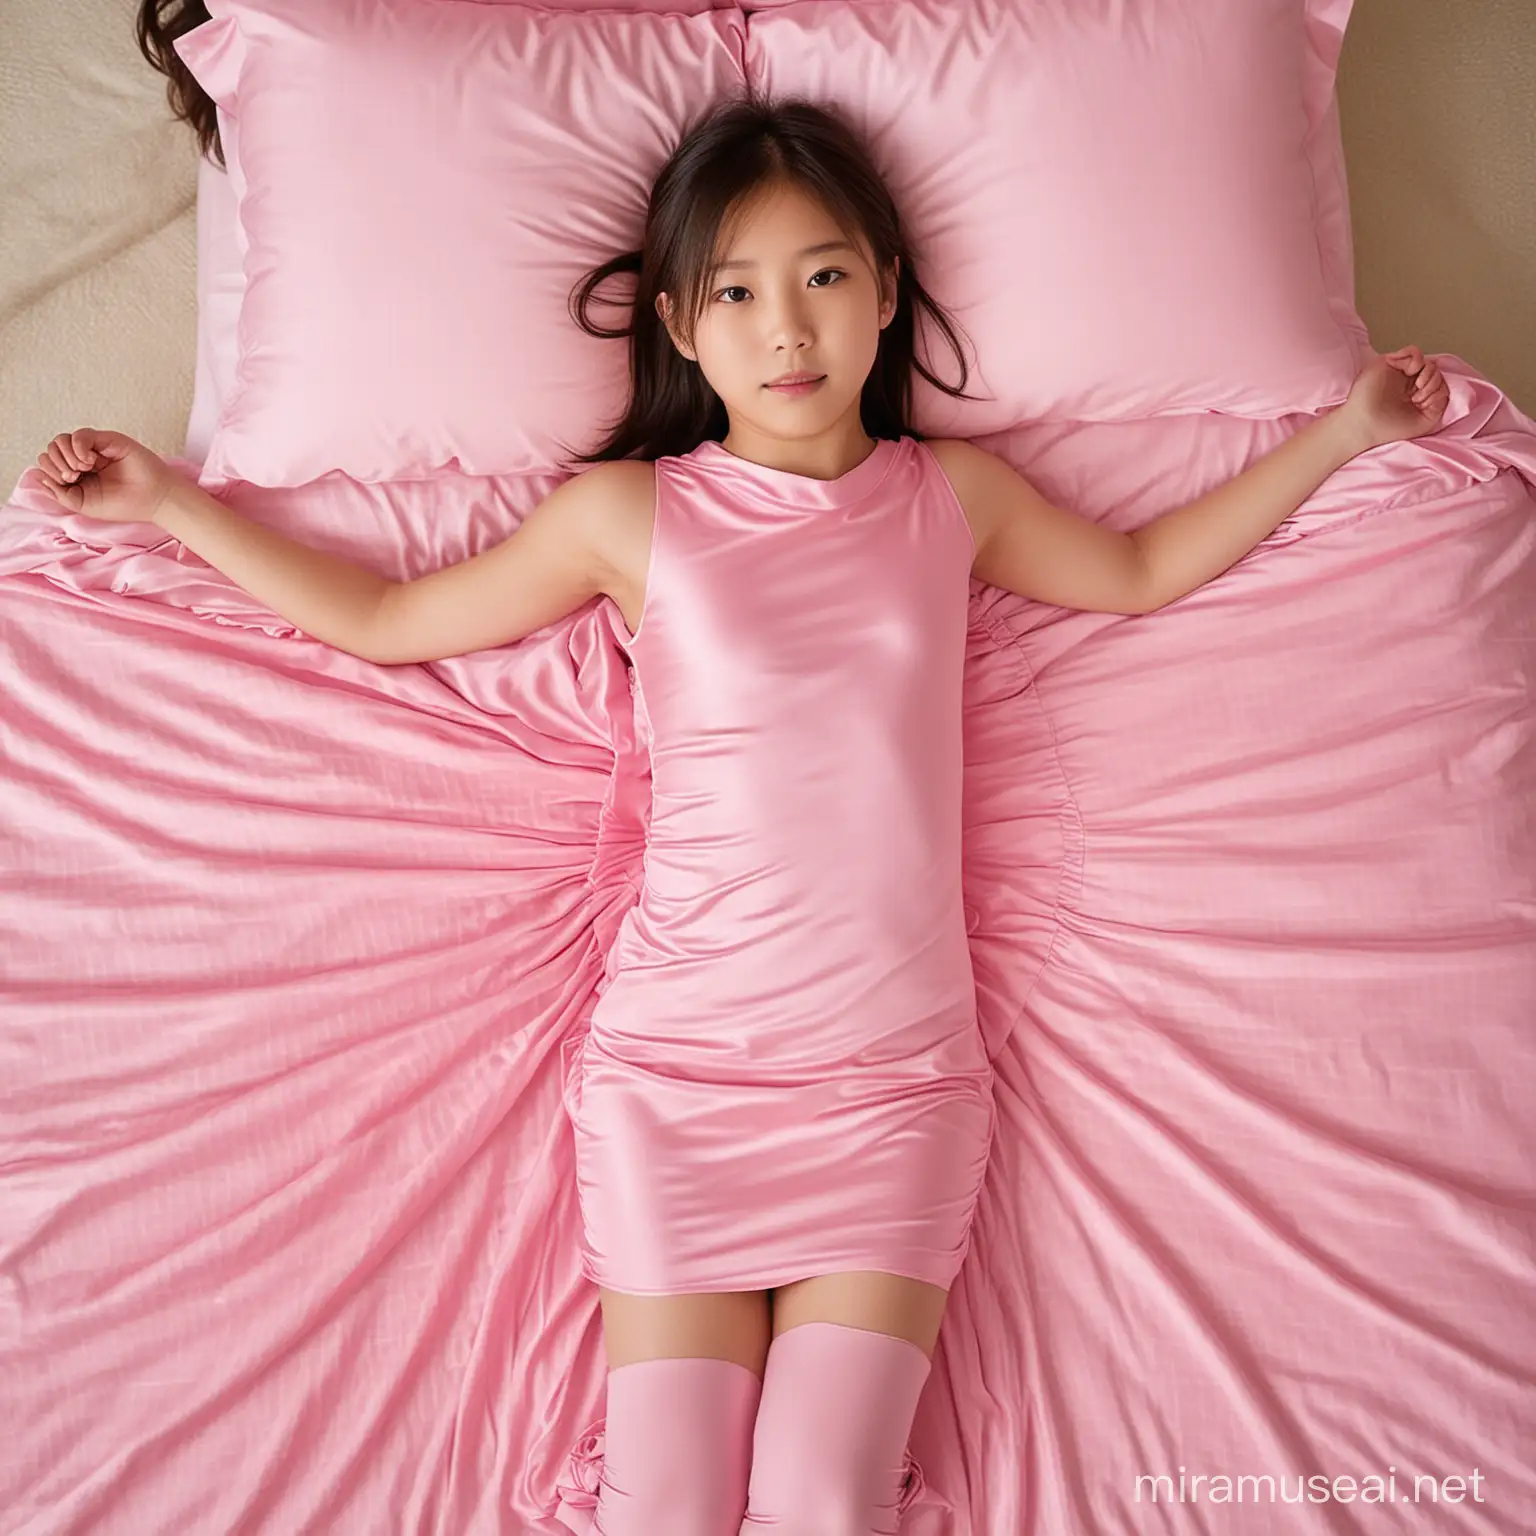 12 years old Japanese girl wearing tight fitting pink dress. She is laying spreadeagle on her back on a bed with her arms behind her back. Viewed from above.